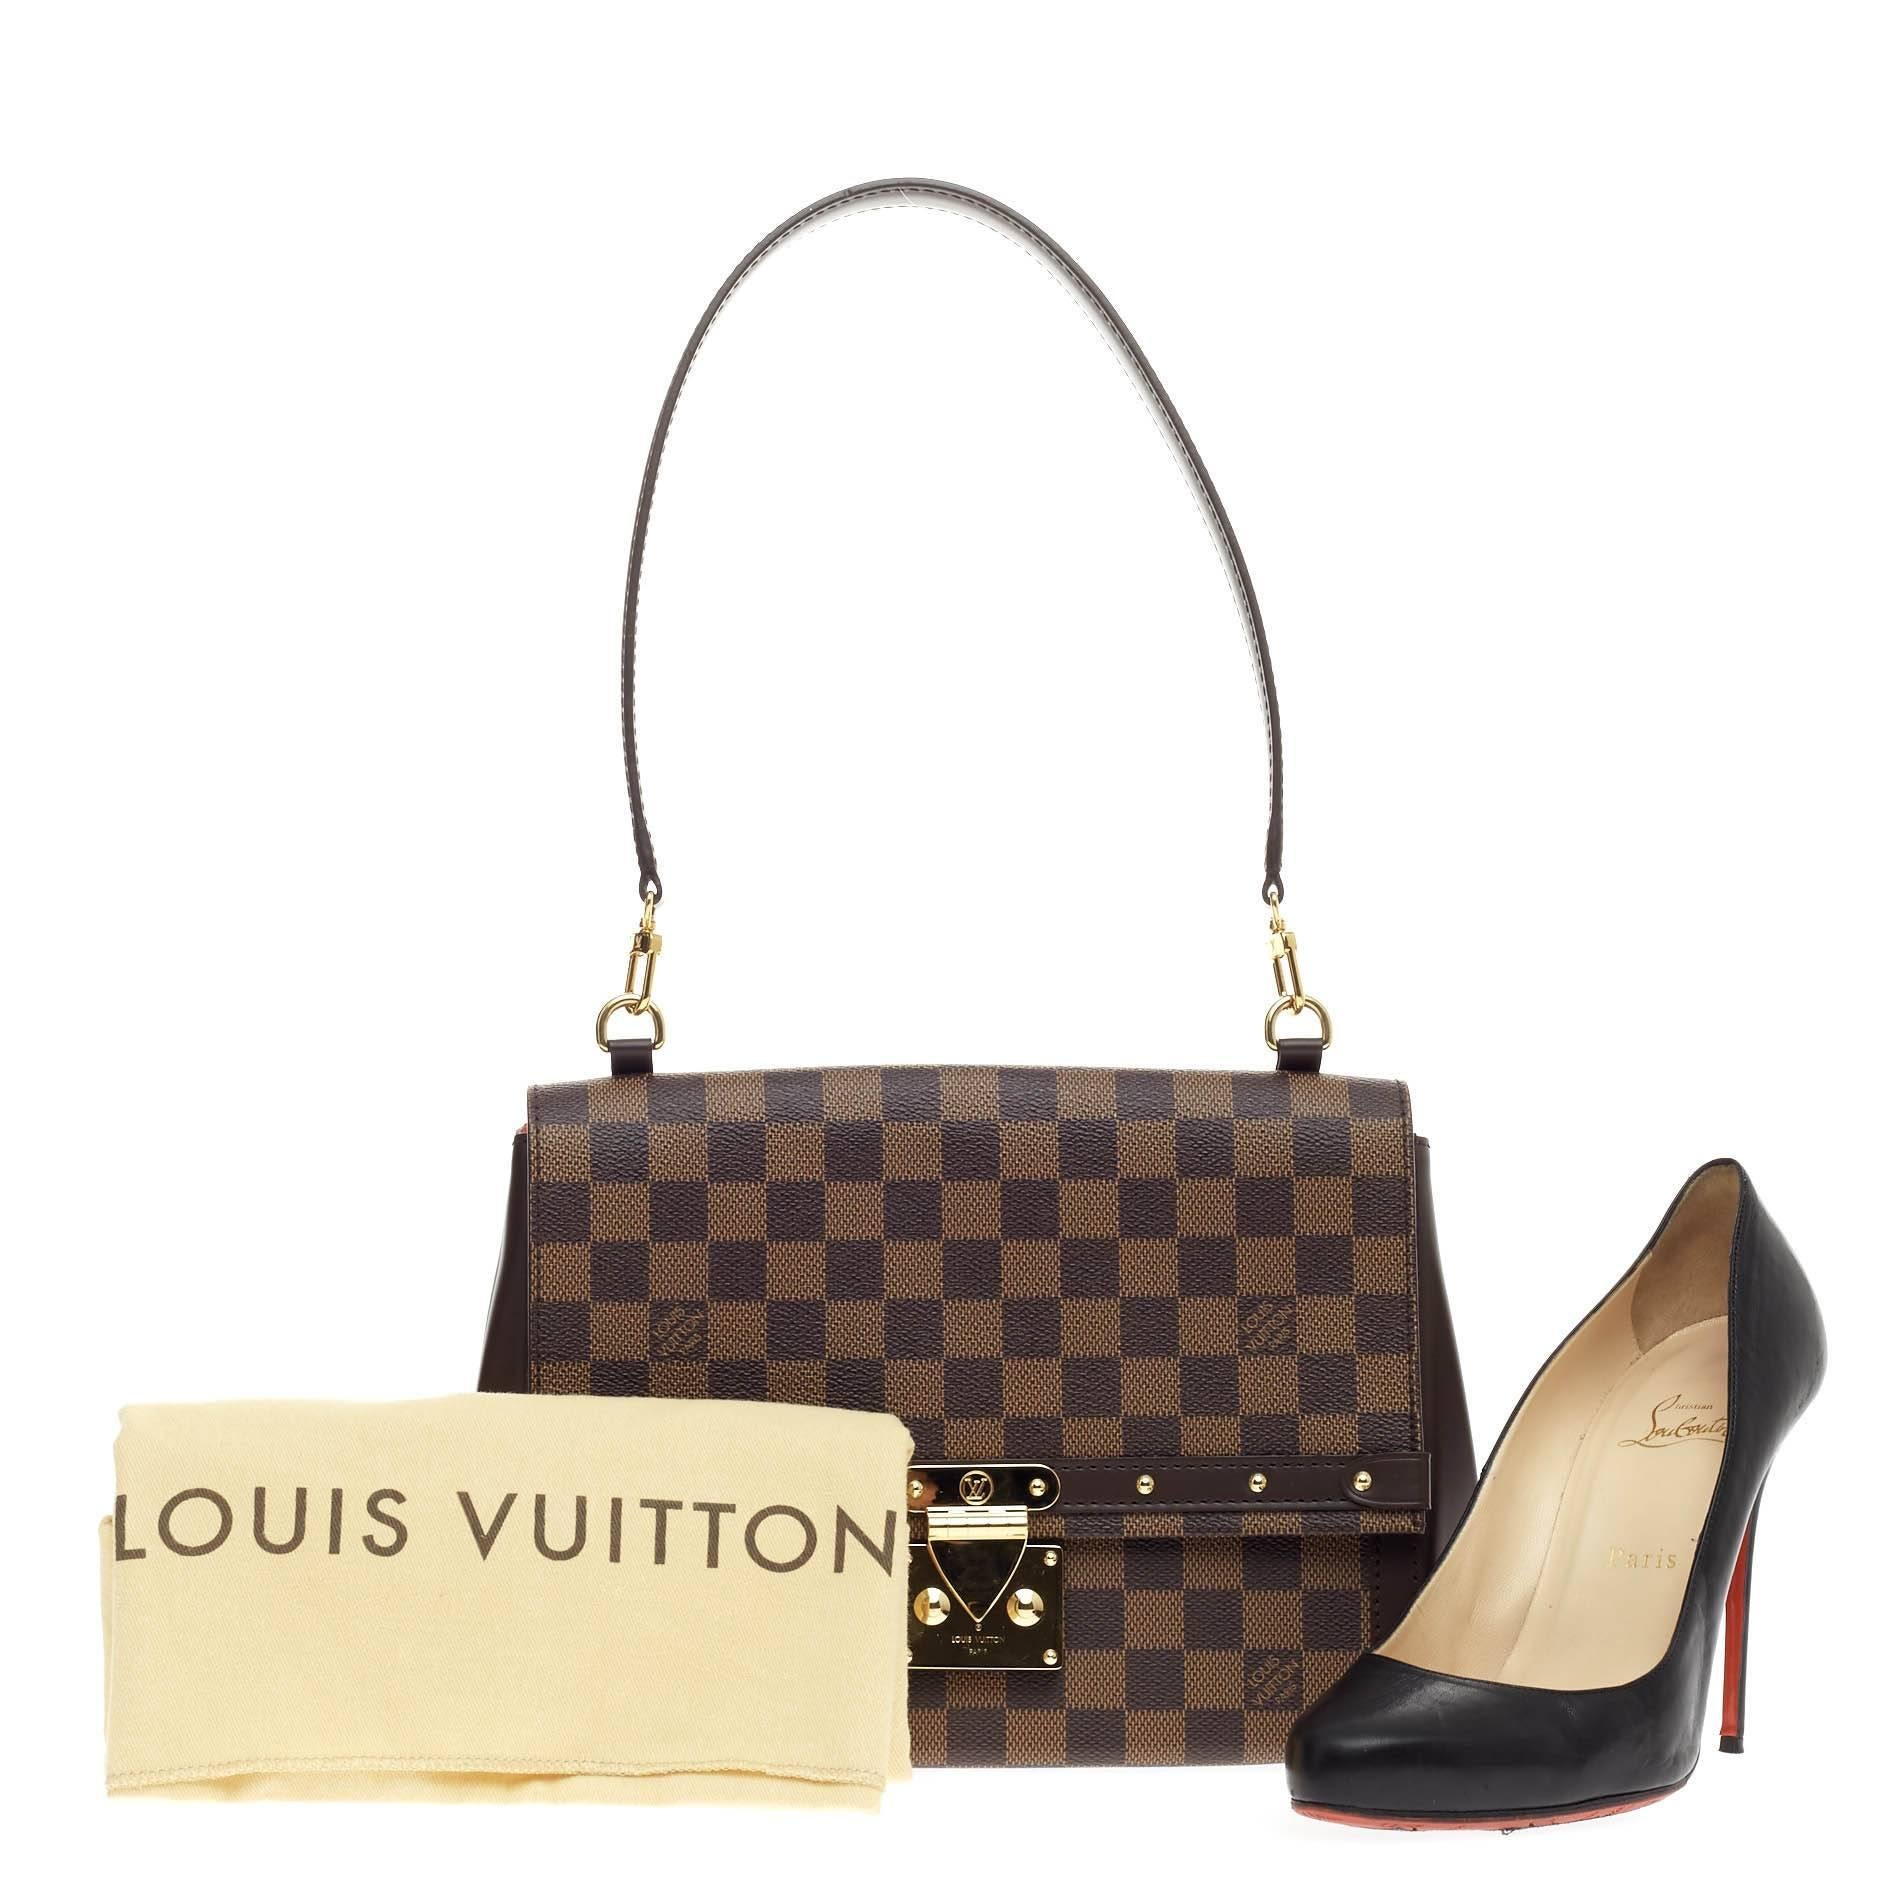 This authentic Louis Vuitton Venice Shoulder Bag Damier is a chic and sophisticated bag loved by many. Crafted from damier ebene canvas, this elegant shoulder bag features brown leather sides and trims, gusseted sides with snap closures, detachable